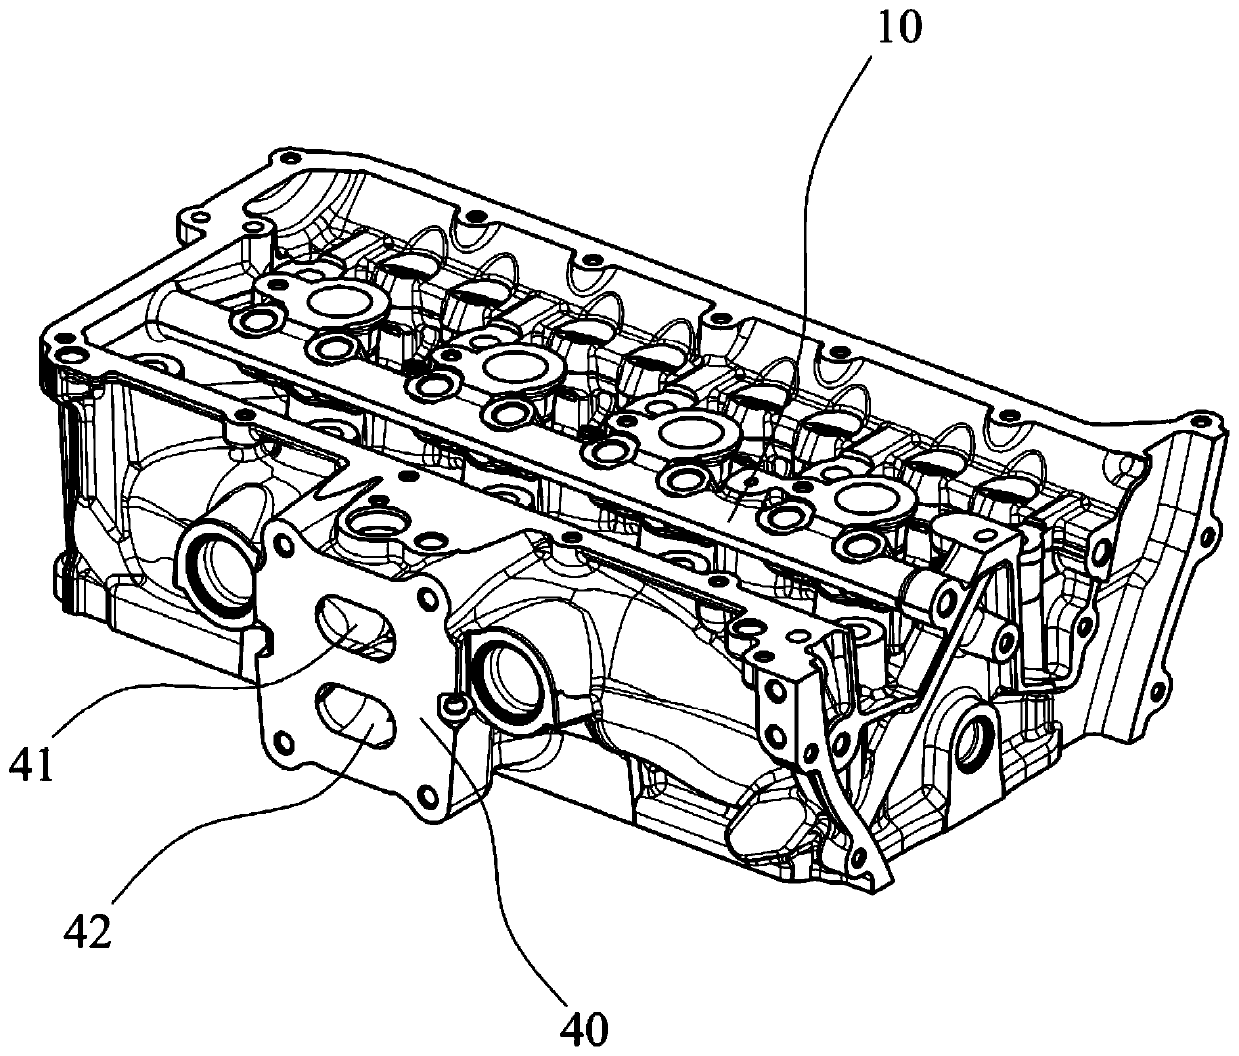 Cylinder cover integrated with exhaust manifold, engine and automobile